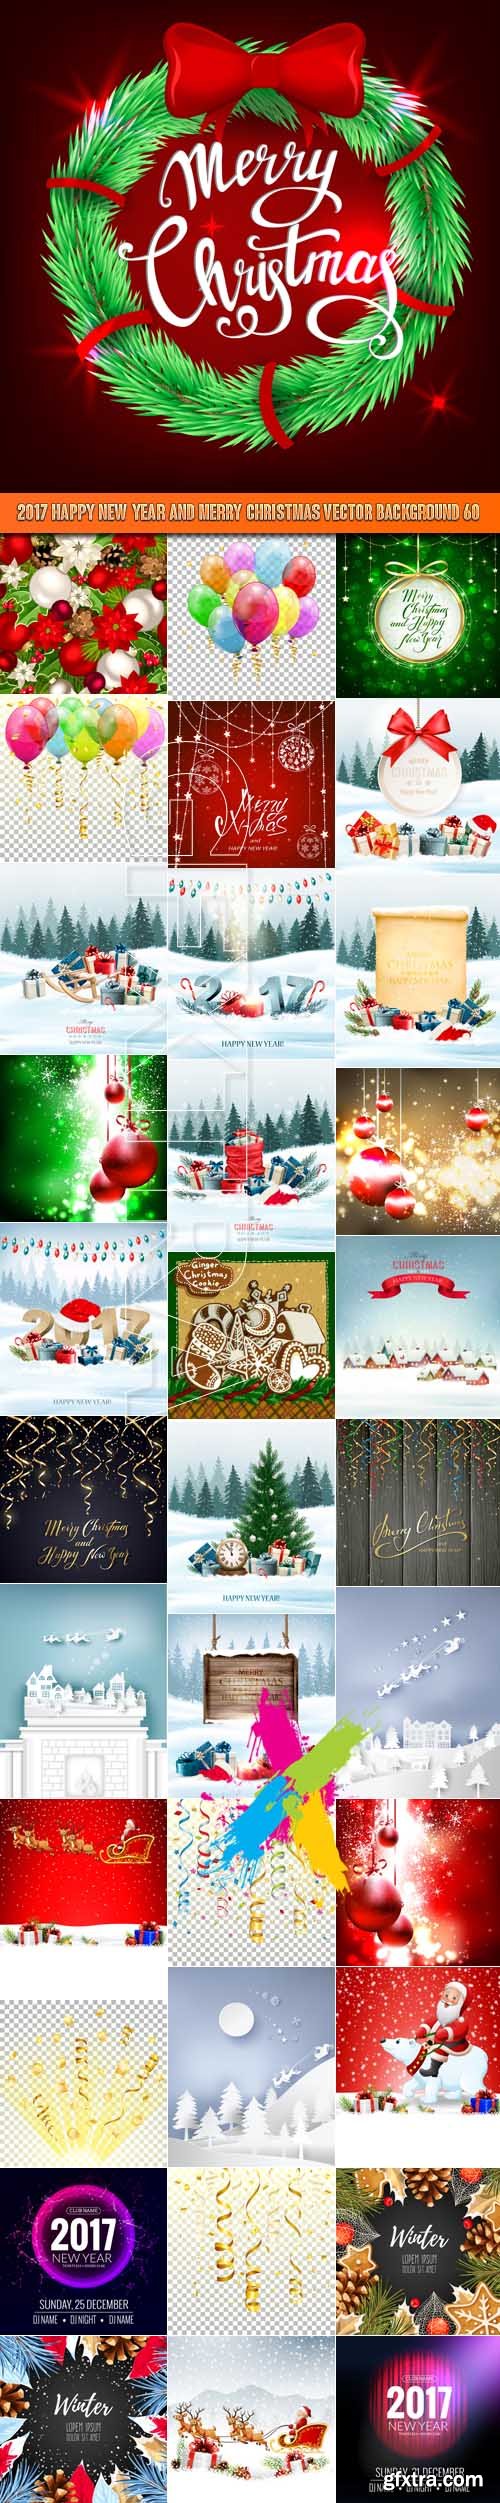 2017 Happy New Year and Merry Christmas vector background 60